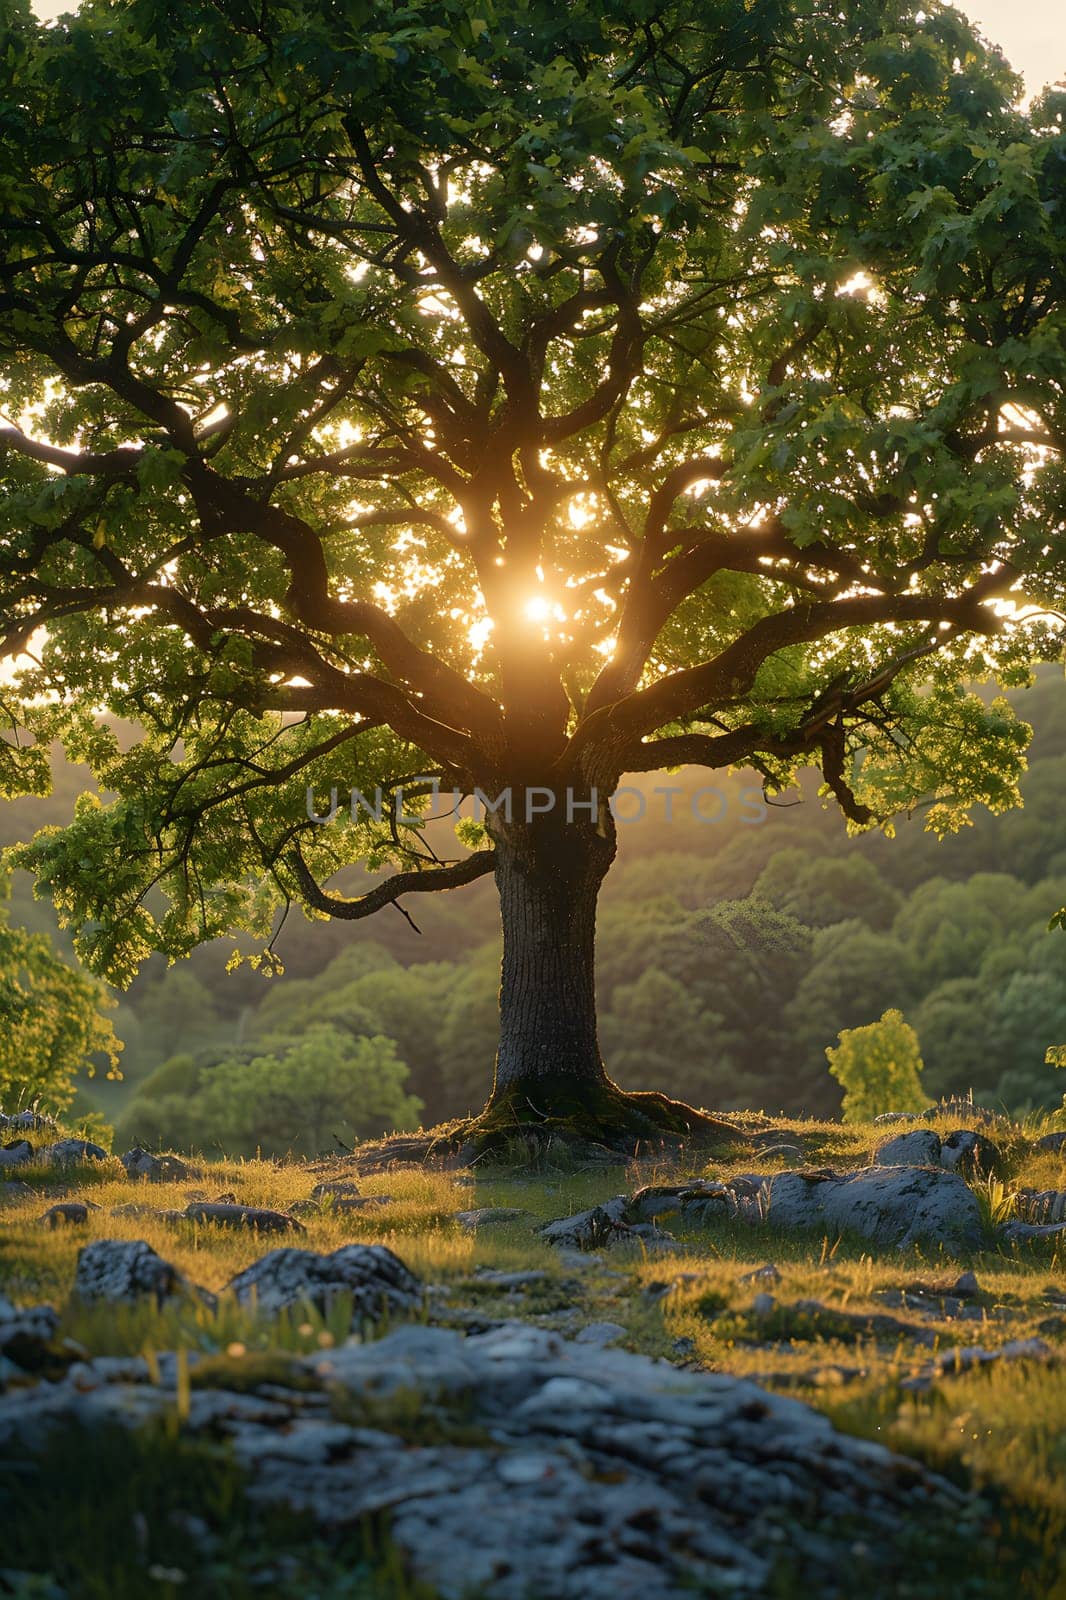 The suns rays are filtering through the branches of a tree, casting beautiful tints and shades on the grass below, creating a mesmerizing natural landscape